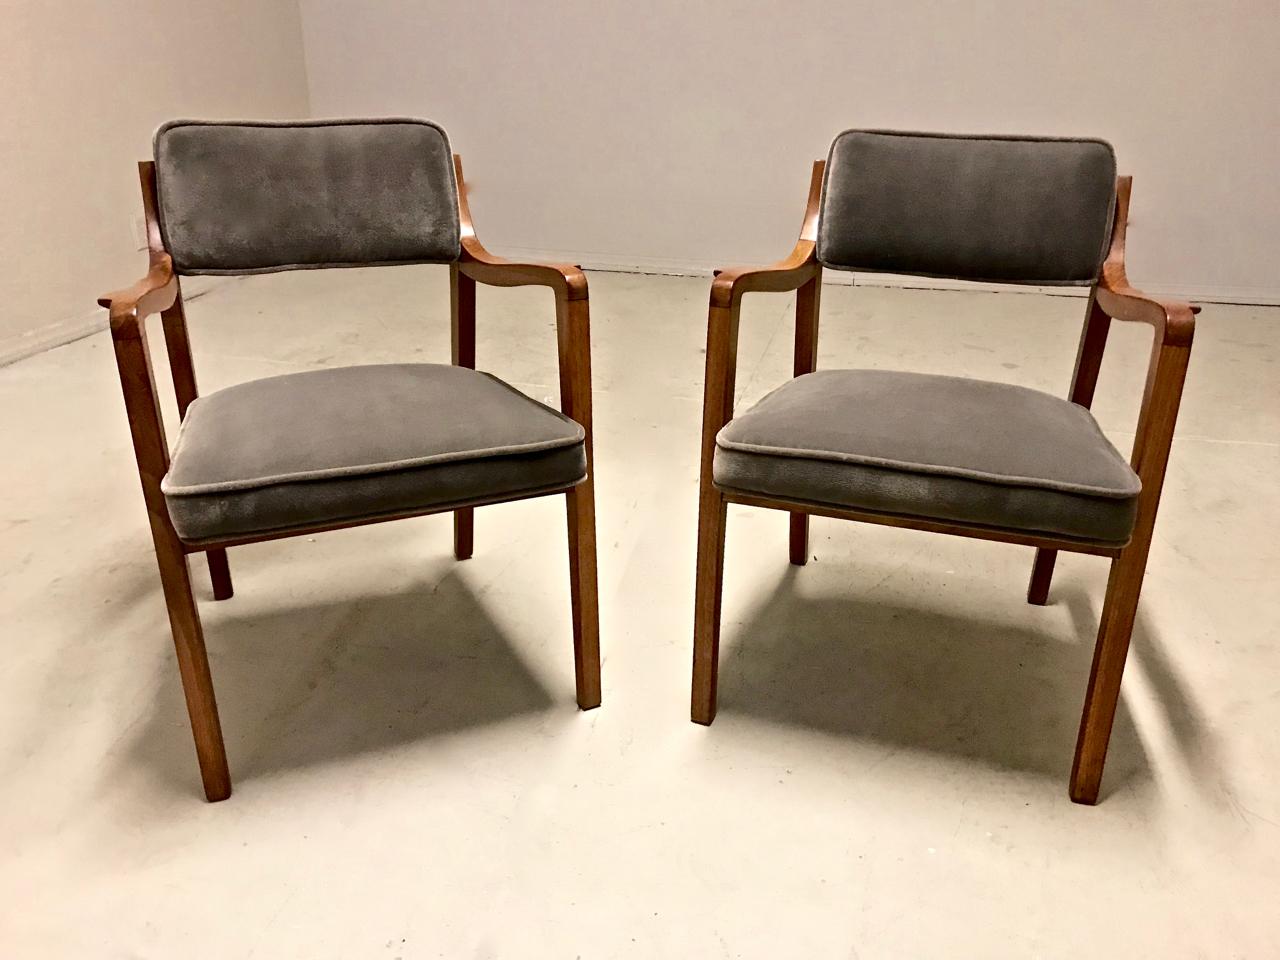 This is a rare set of 2 Edward Wormley for Dunbar 